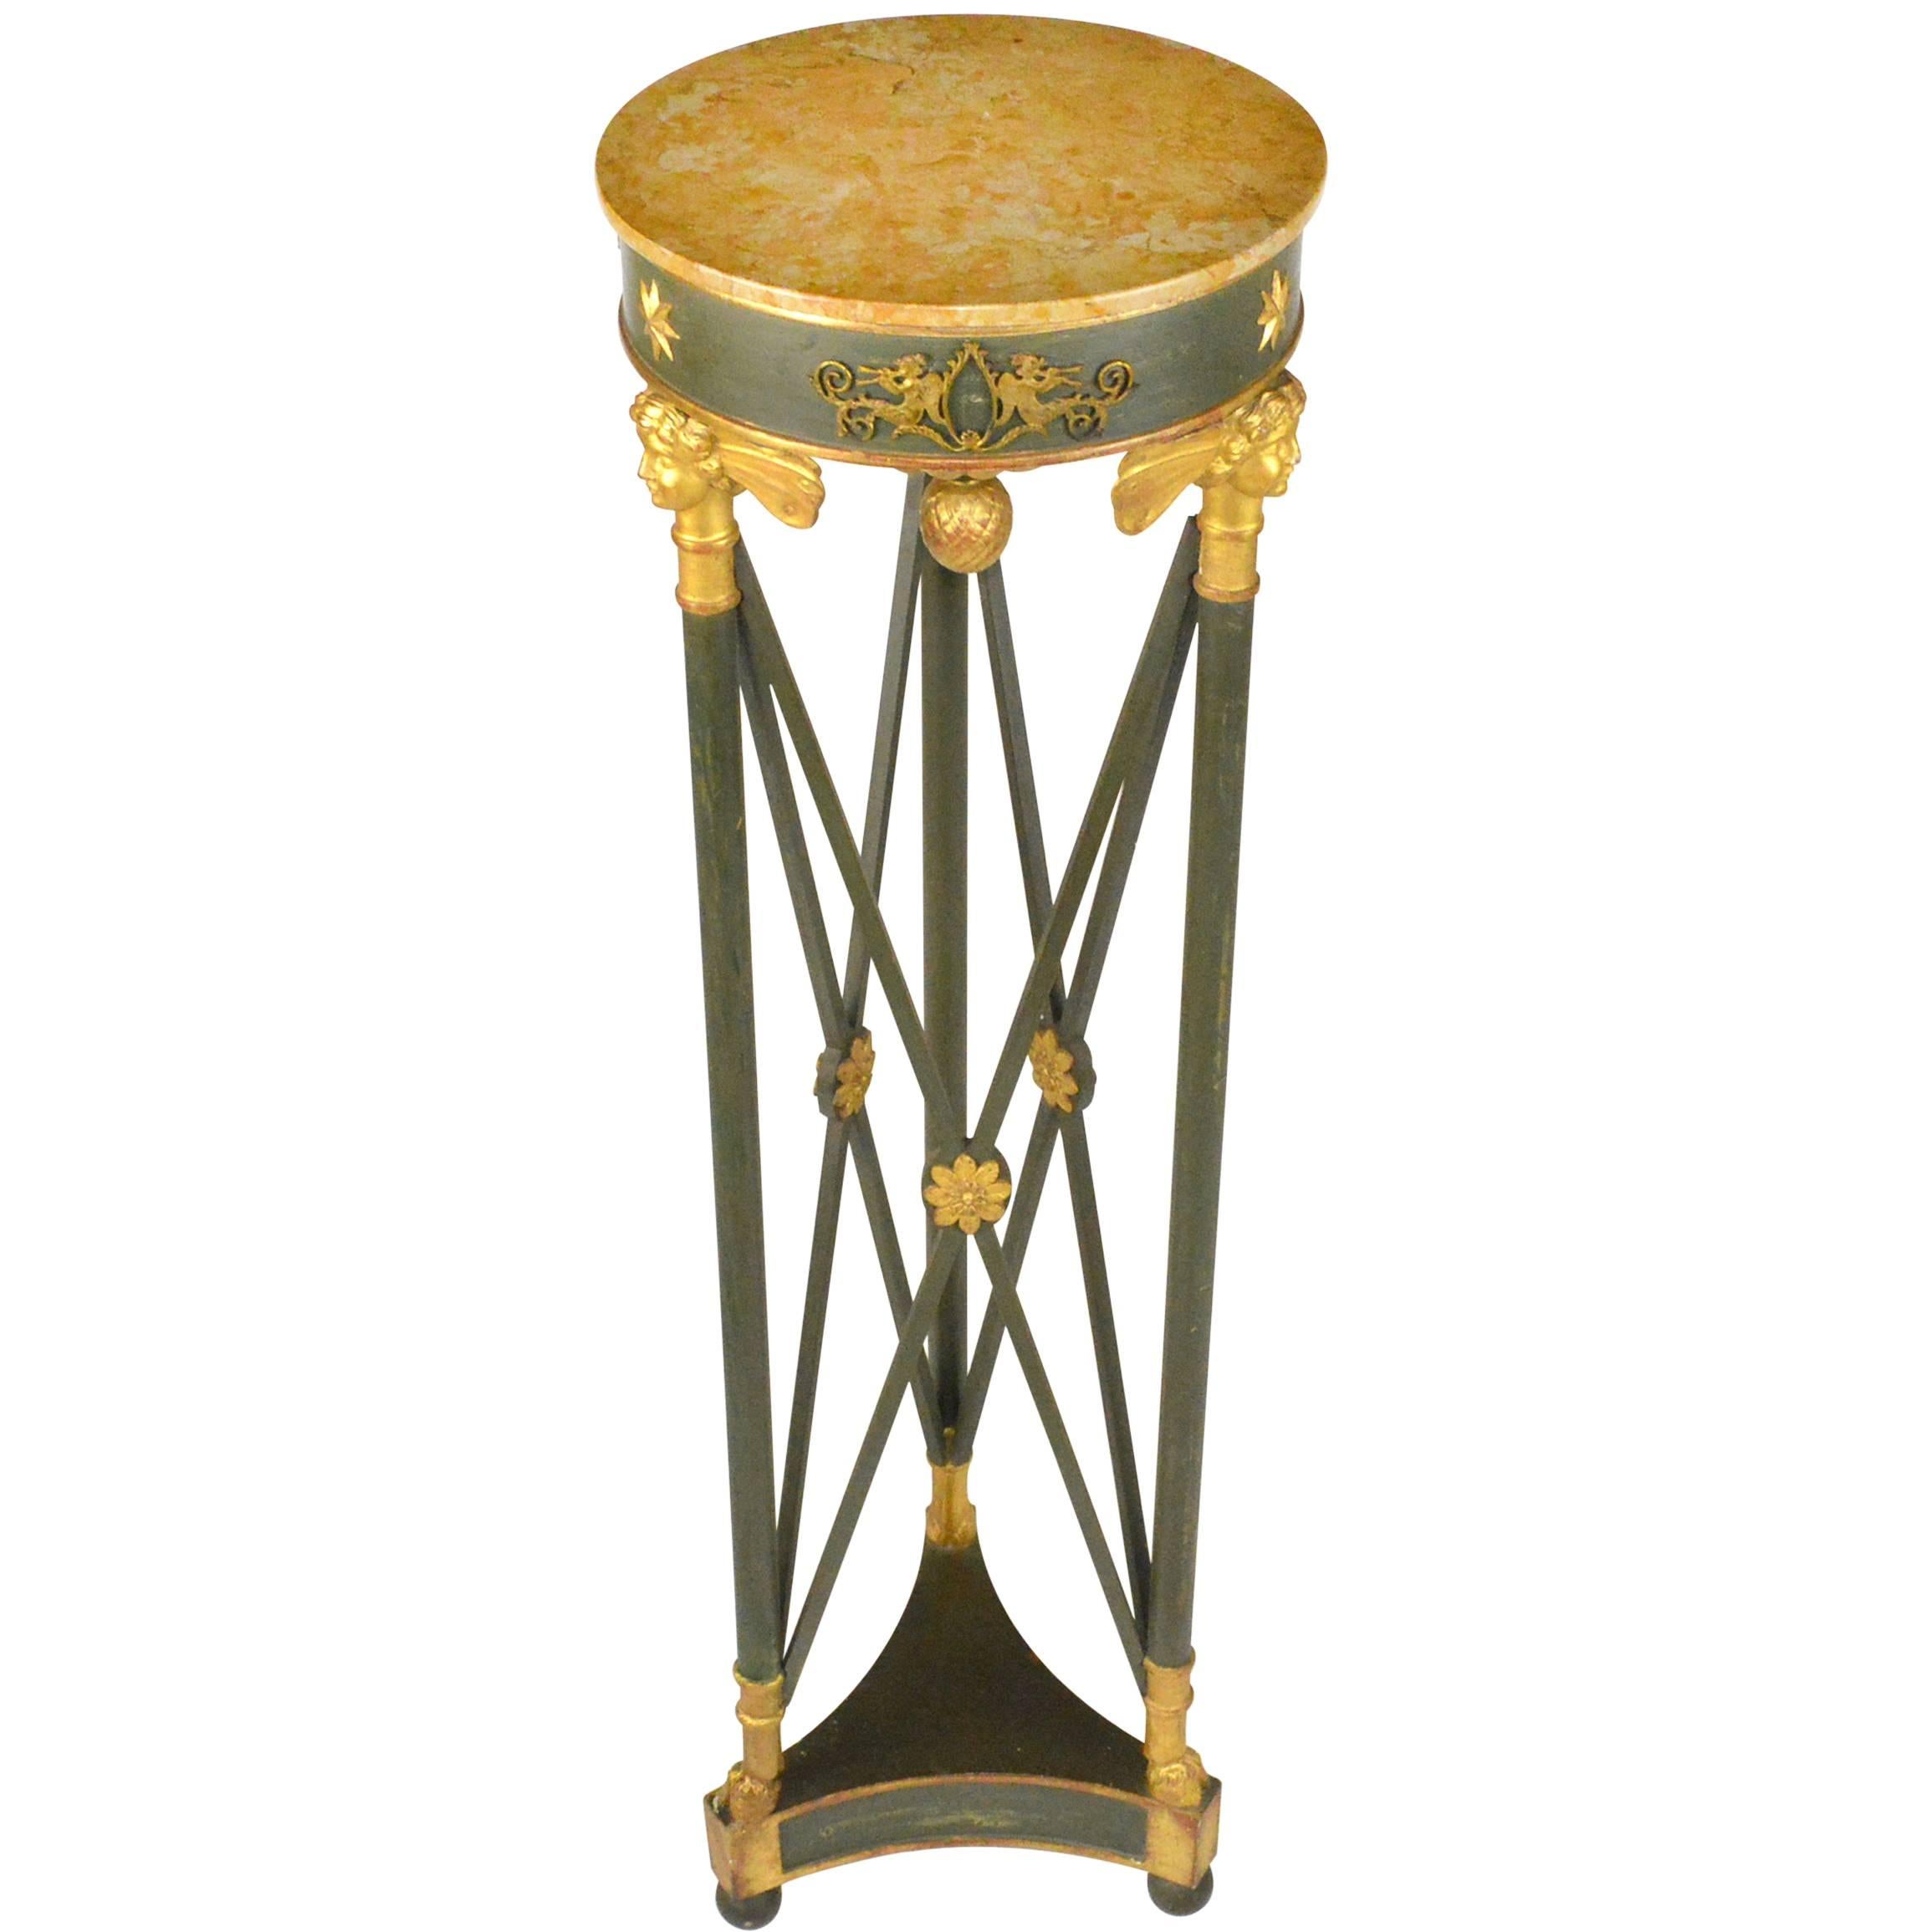 French Empire Style Gilt and Painted Wood Pedestal For Sale